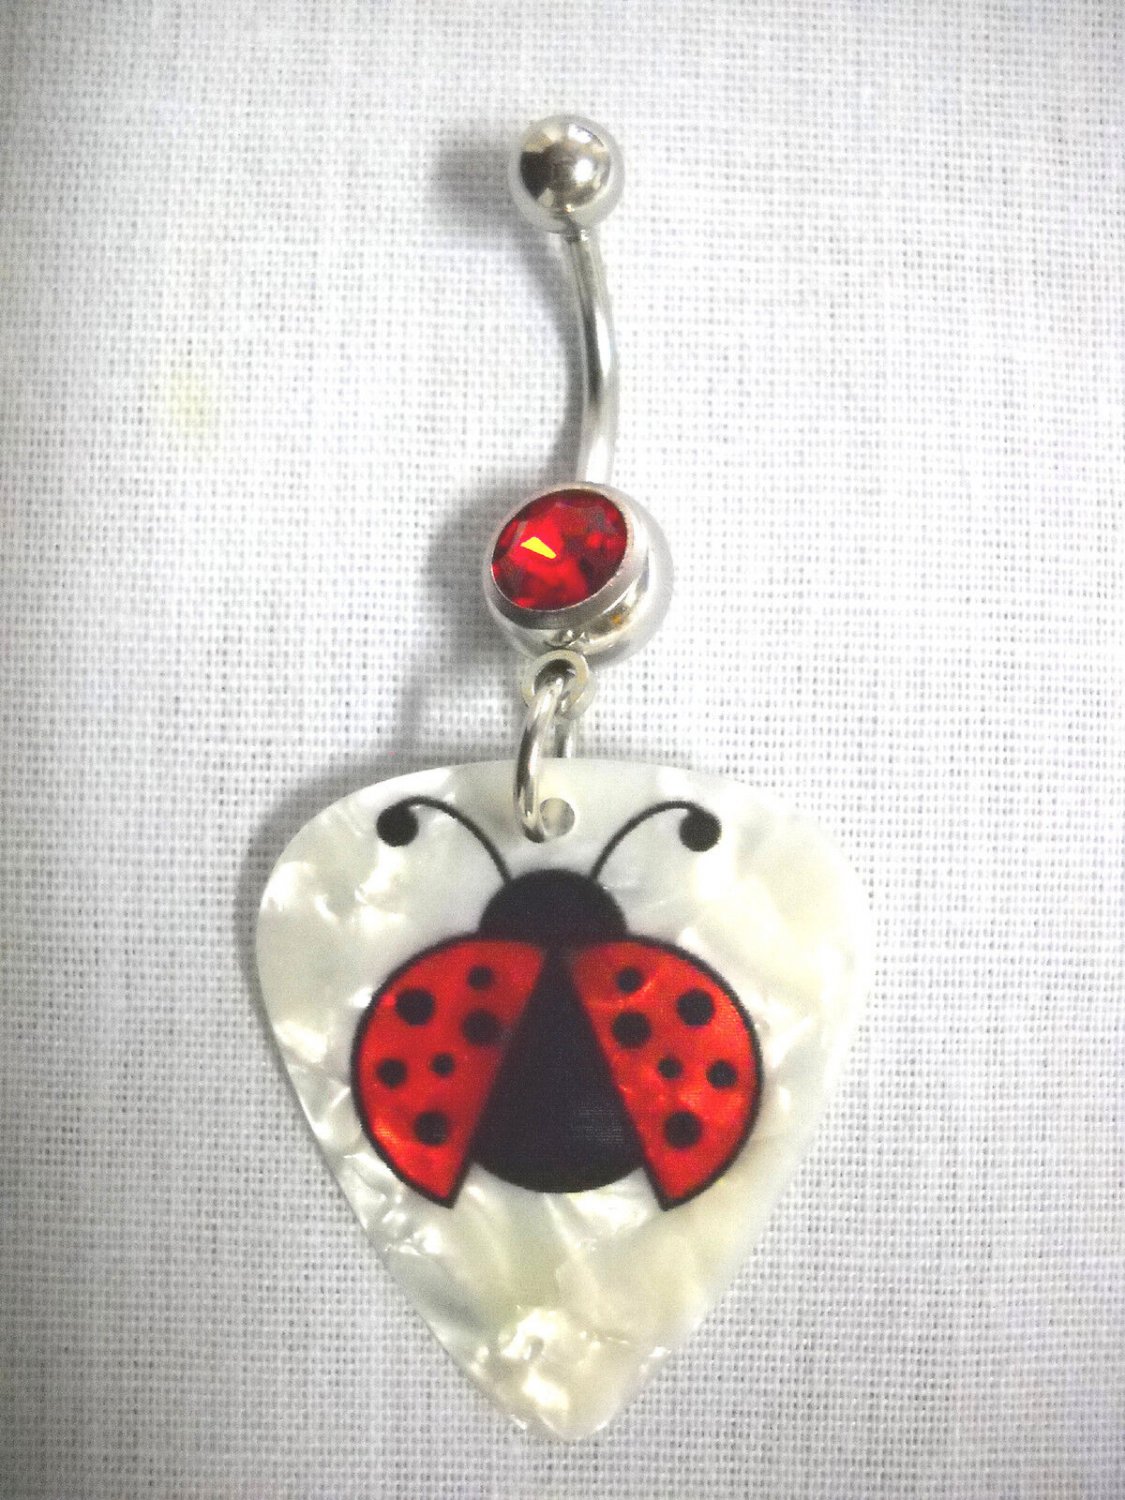 NEW NATURE GIRL LADYBUG PRINTED GUITAR PICK JEWELRY w DAZZLING RED CZ BELLY RING